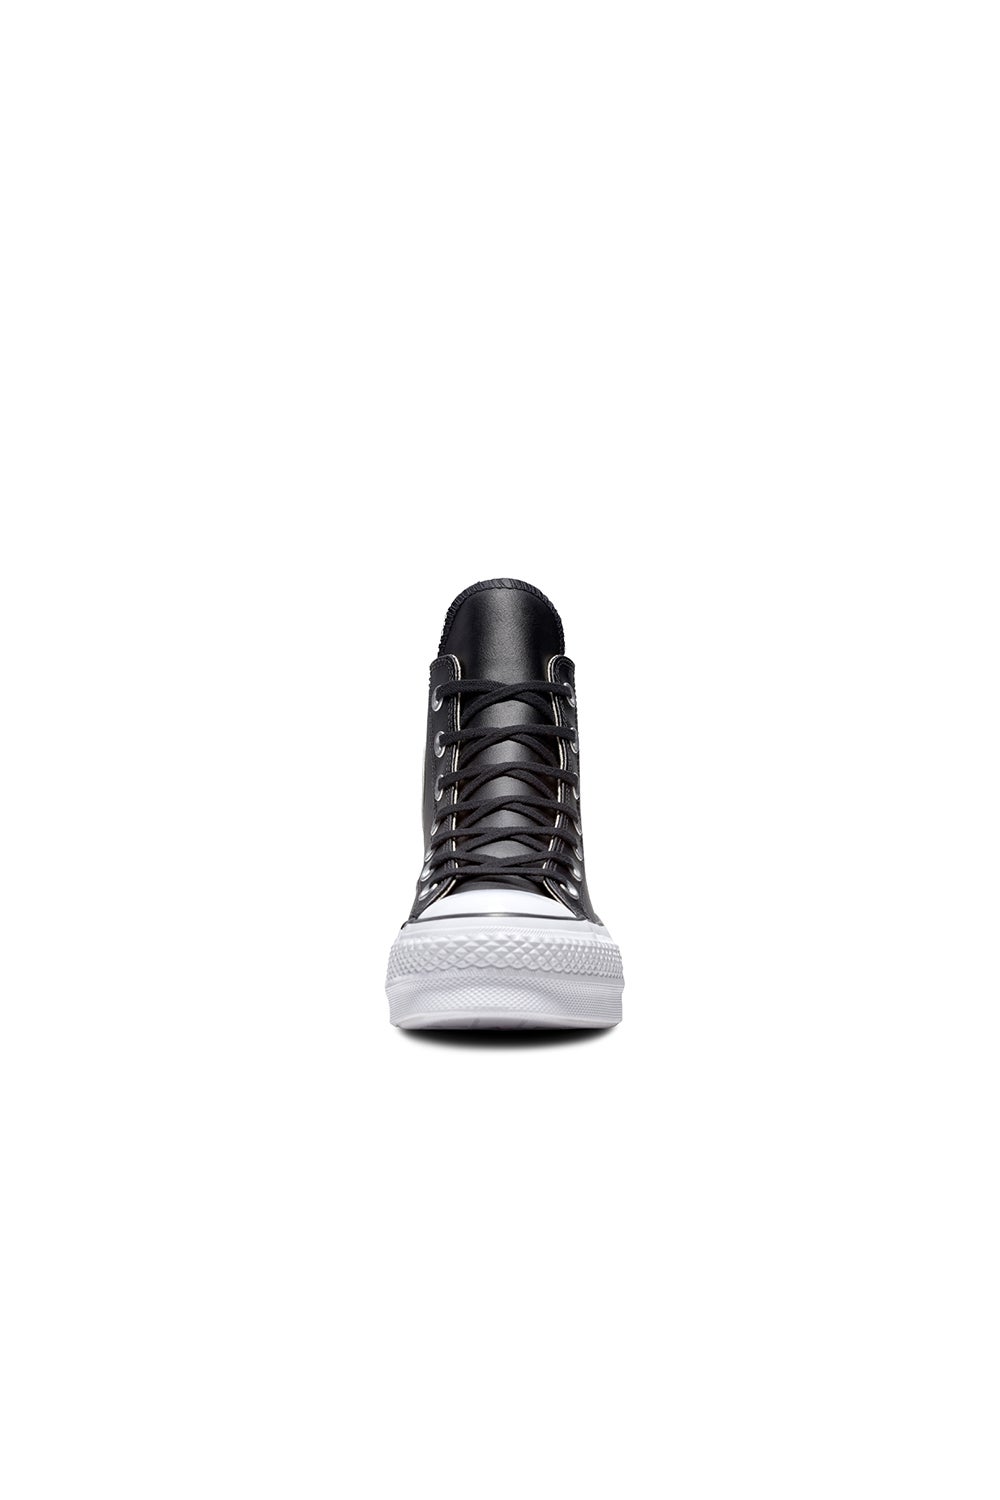 Converse Chuck Taylor All Star Lift Clean Leather High Top Black